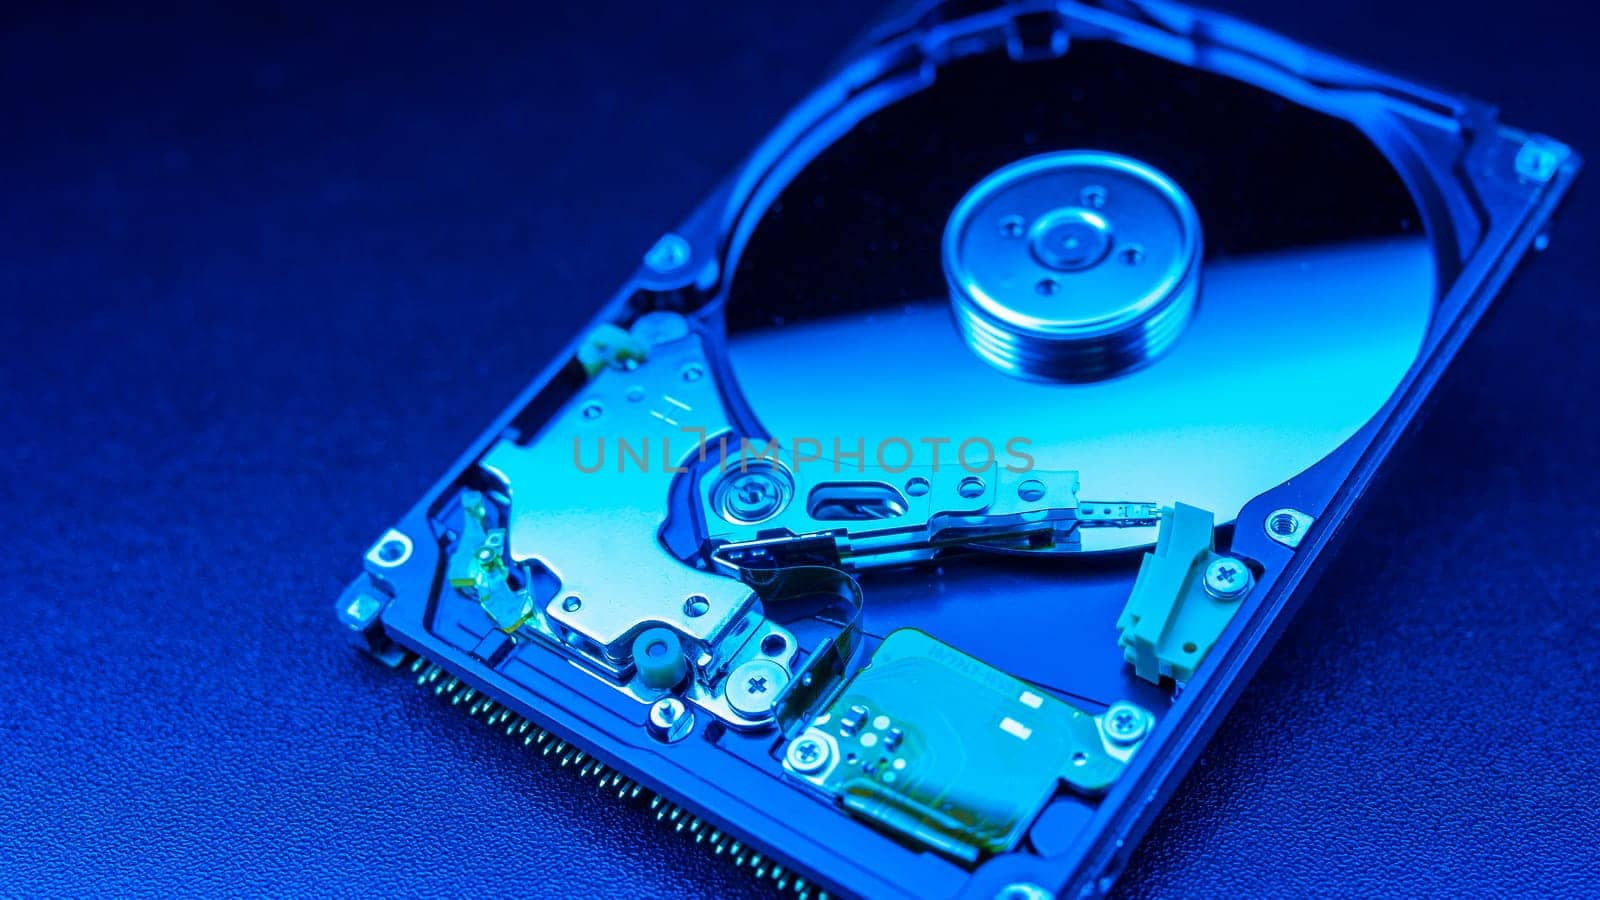 An open hard disk disassembled HDD of a computer or laptop lies on a blue surface. Computer hardware and accessories. Hard disk storage. by Unimages2527